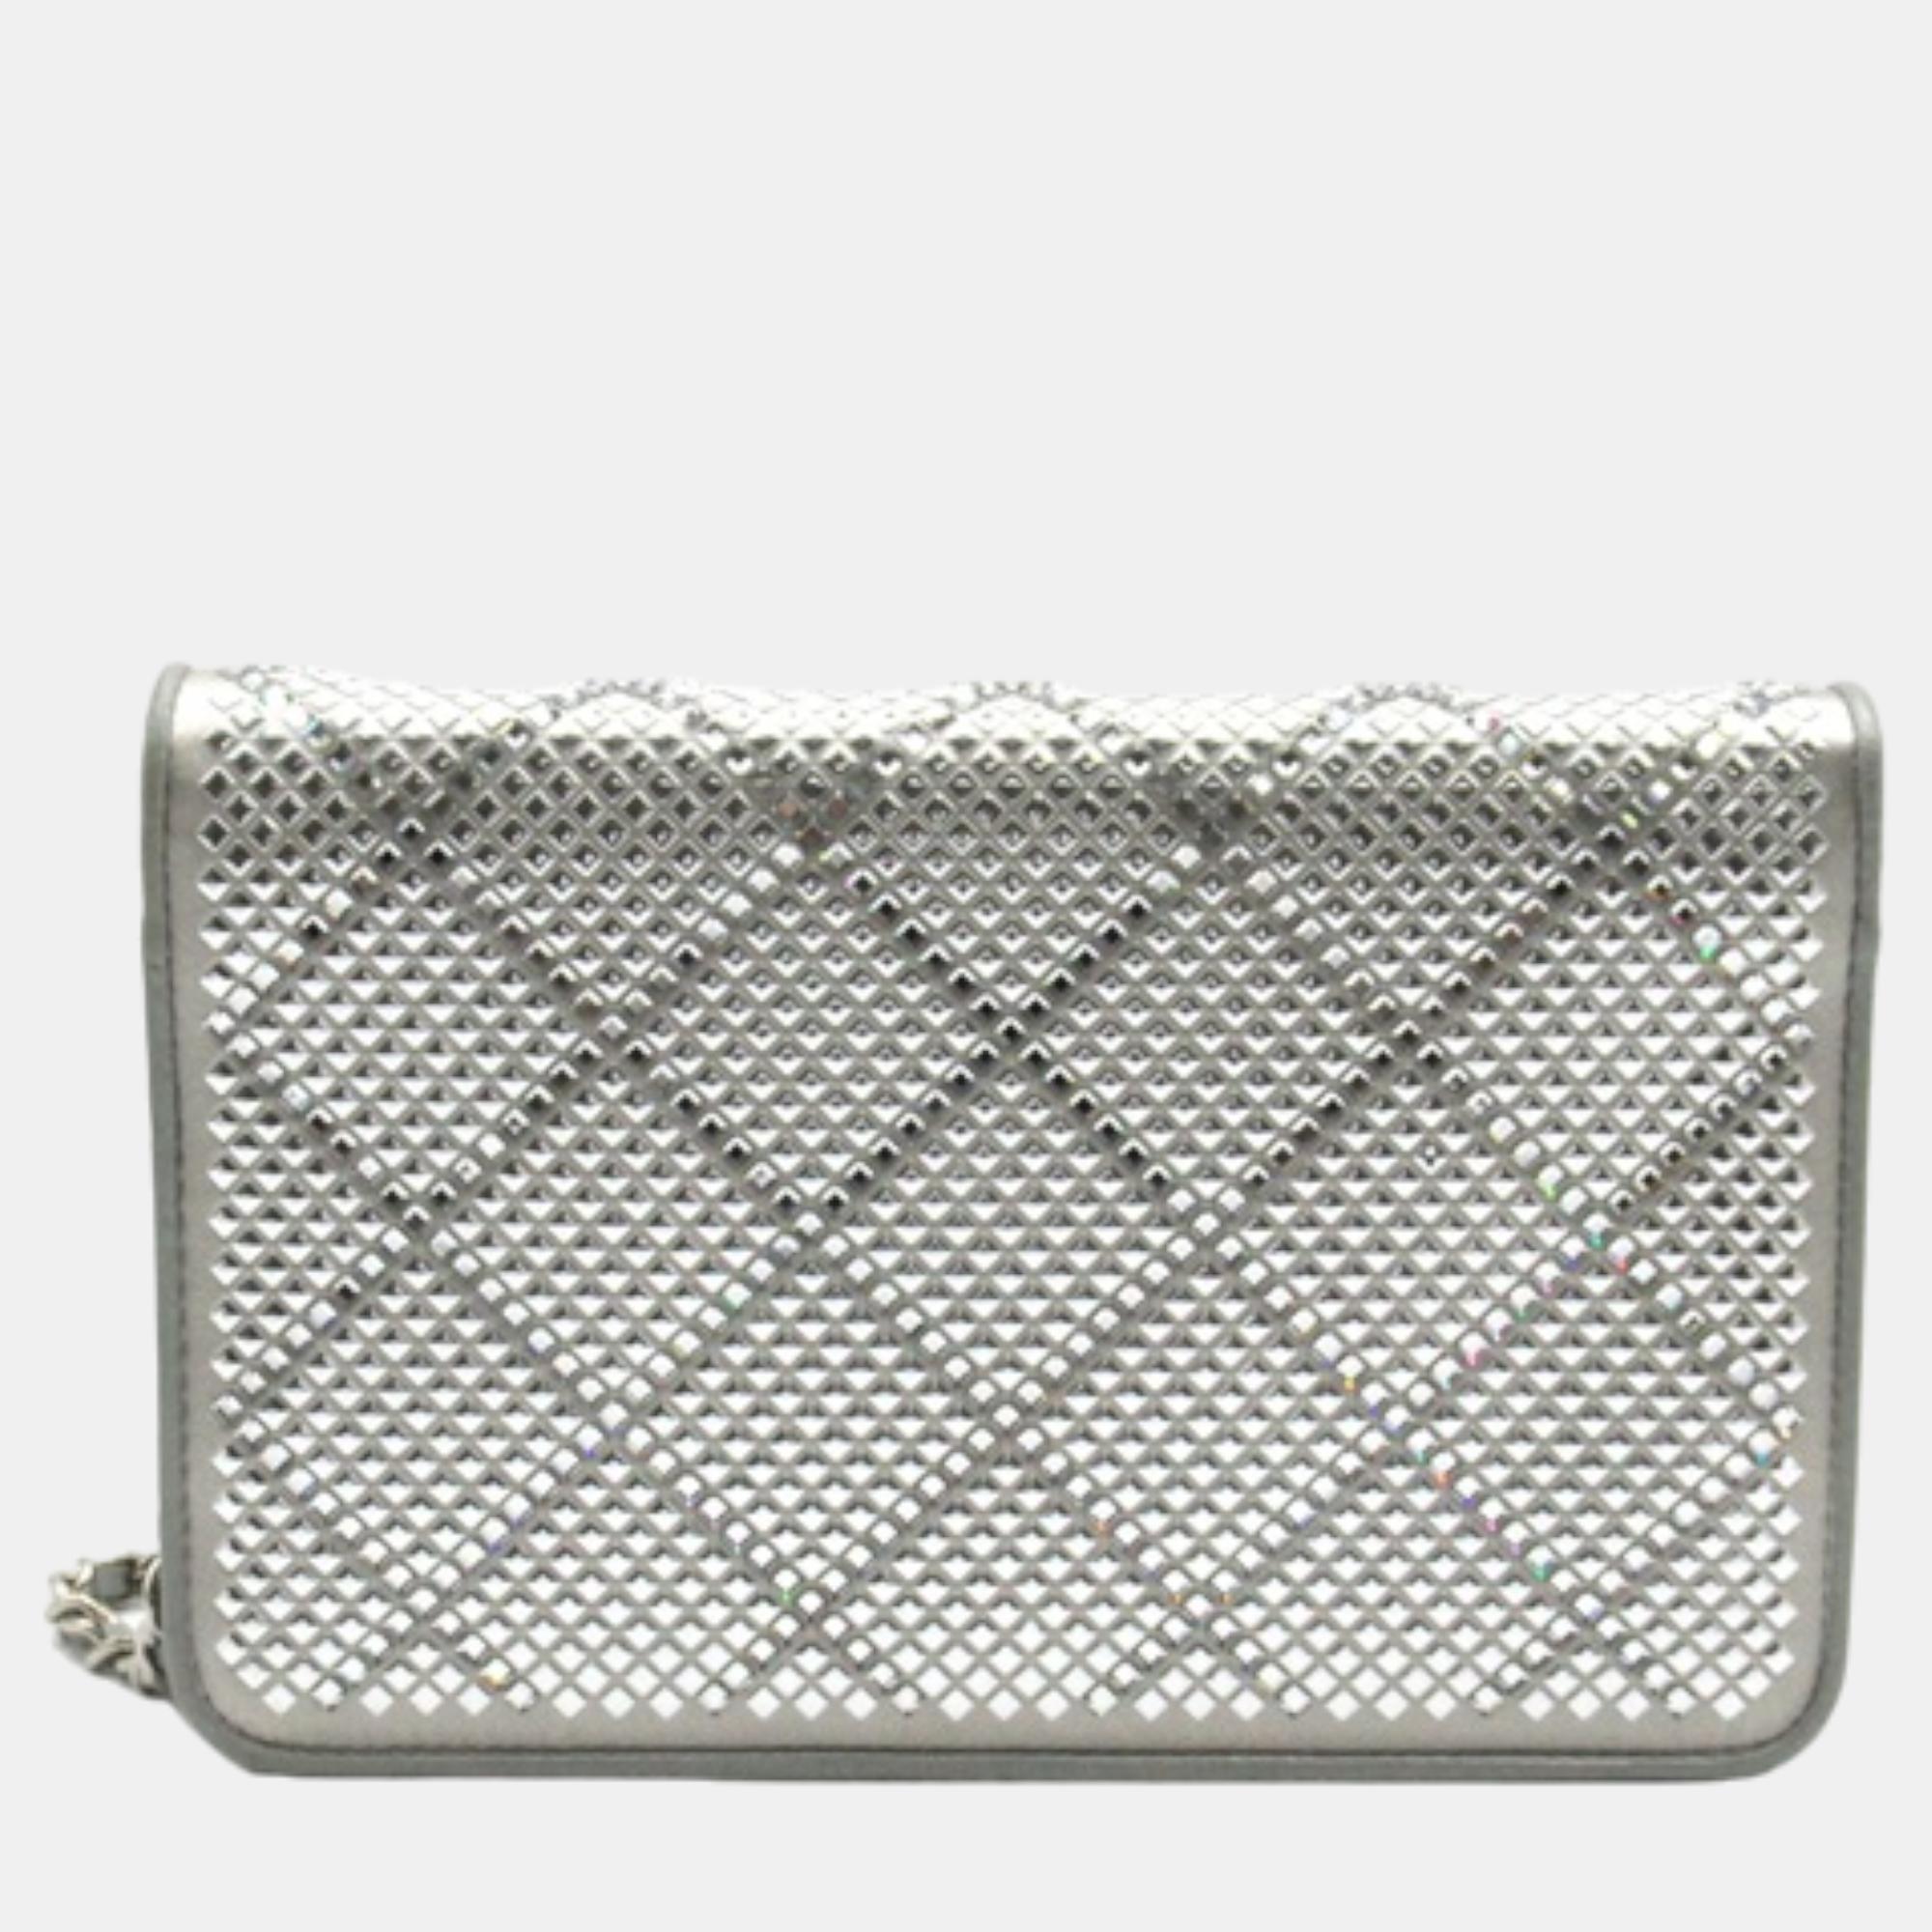 Chanel Silver Leather Studded Matelasse Wallet On Chain Crossbody Bag